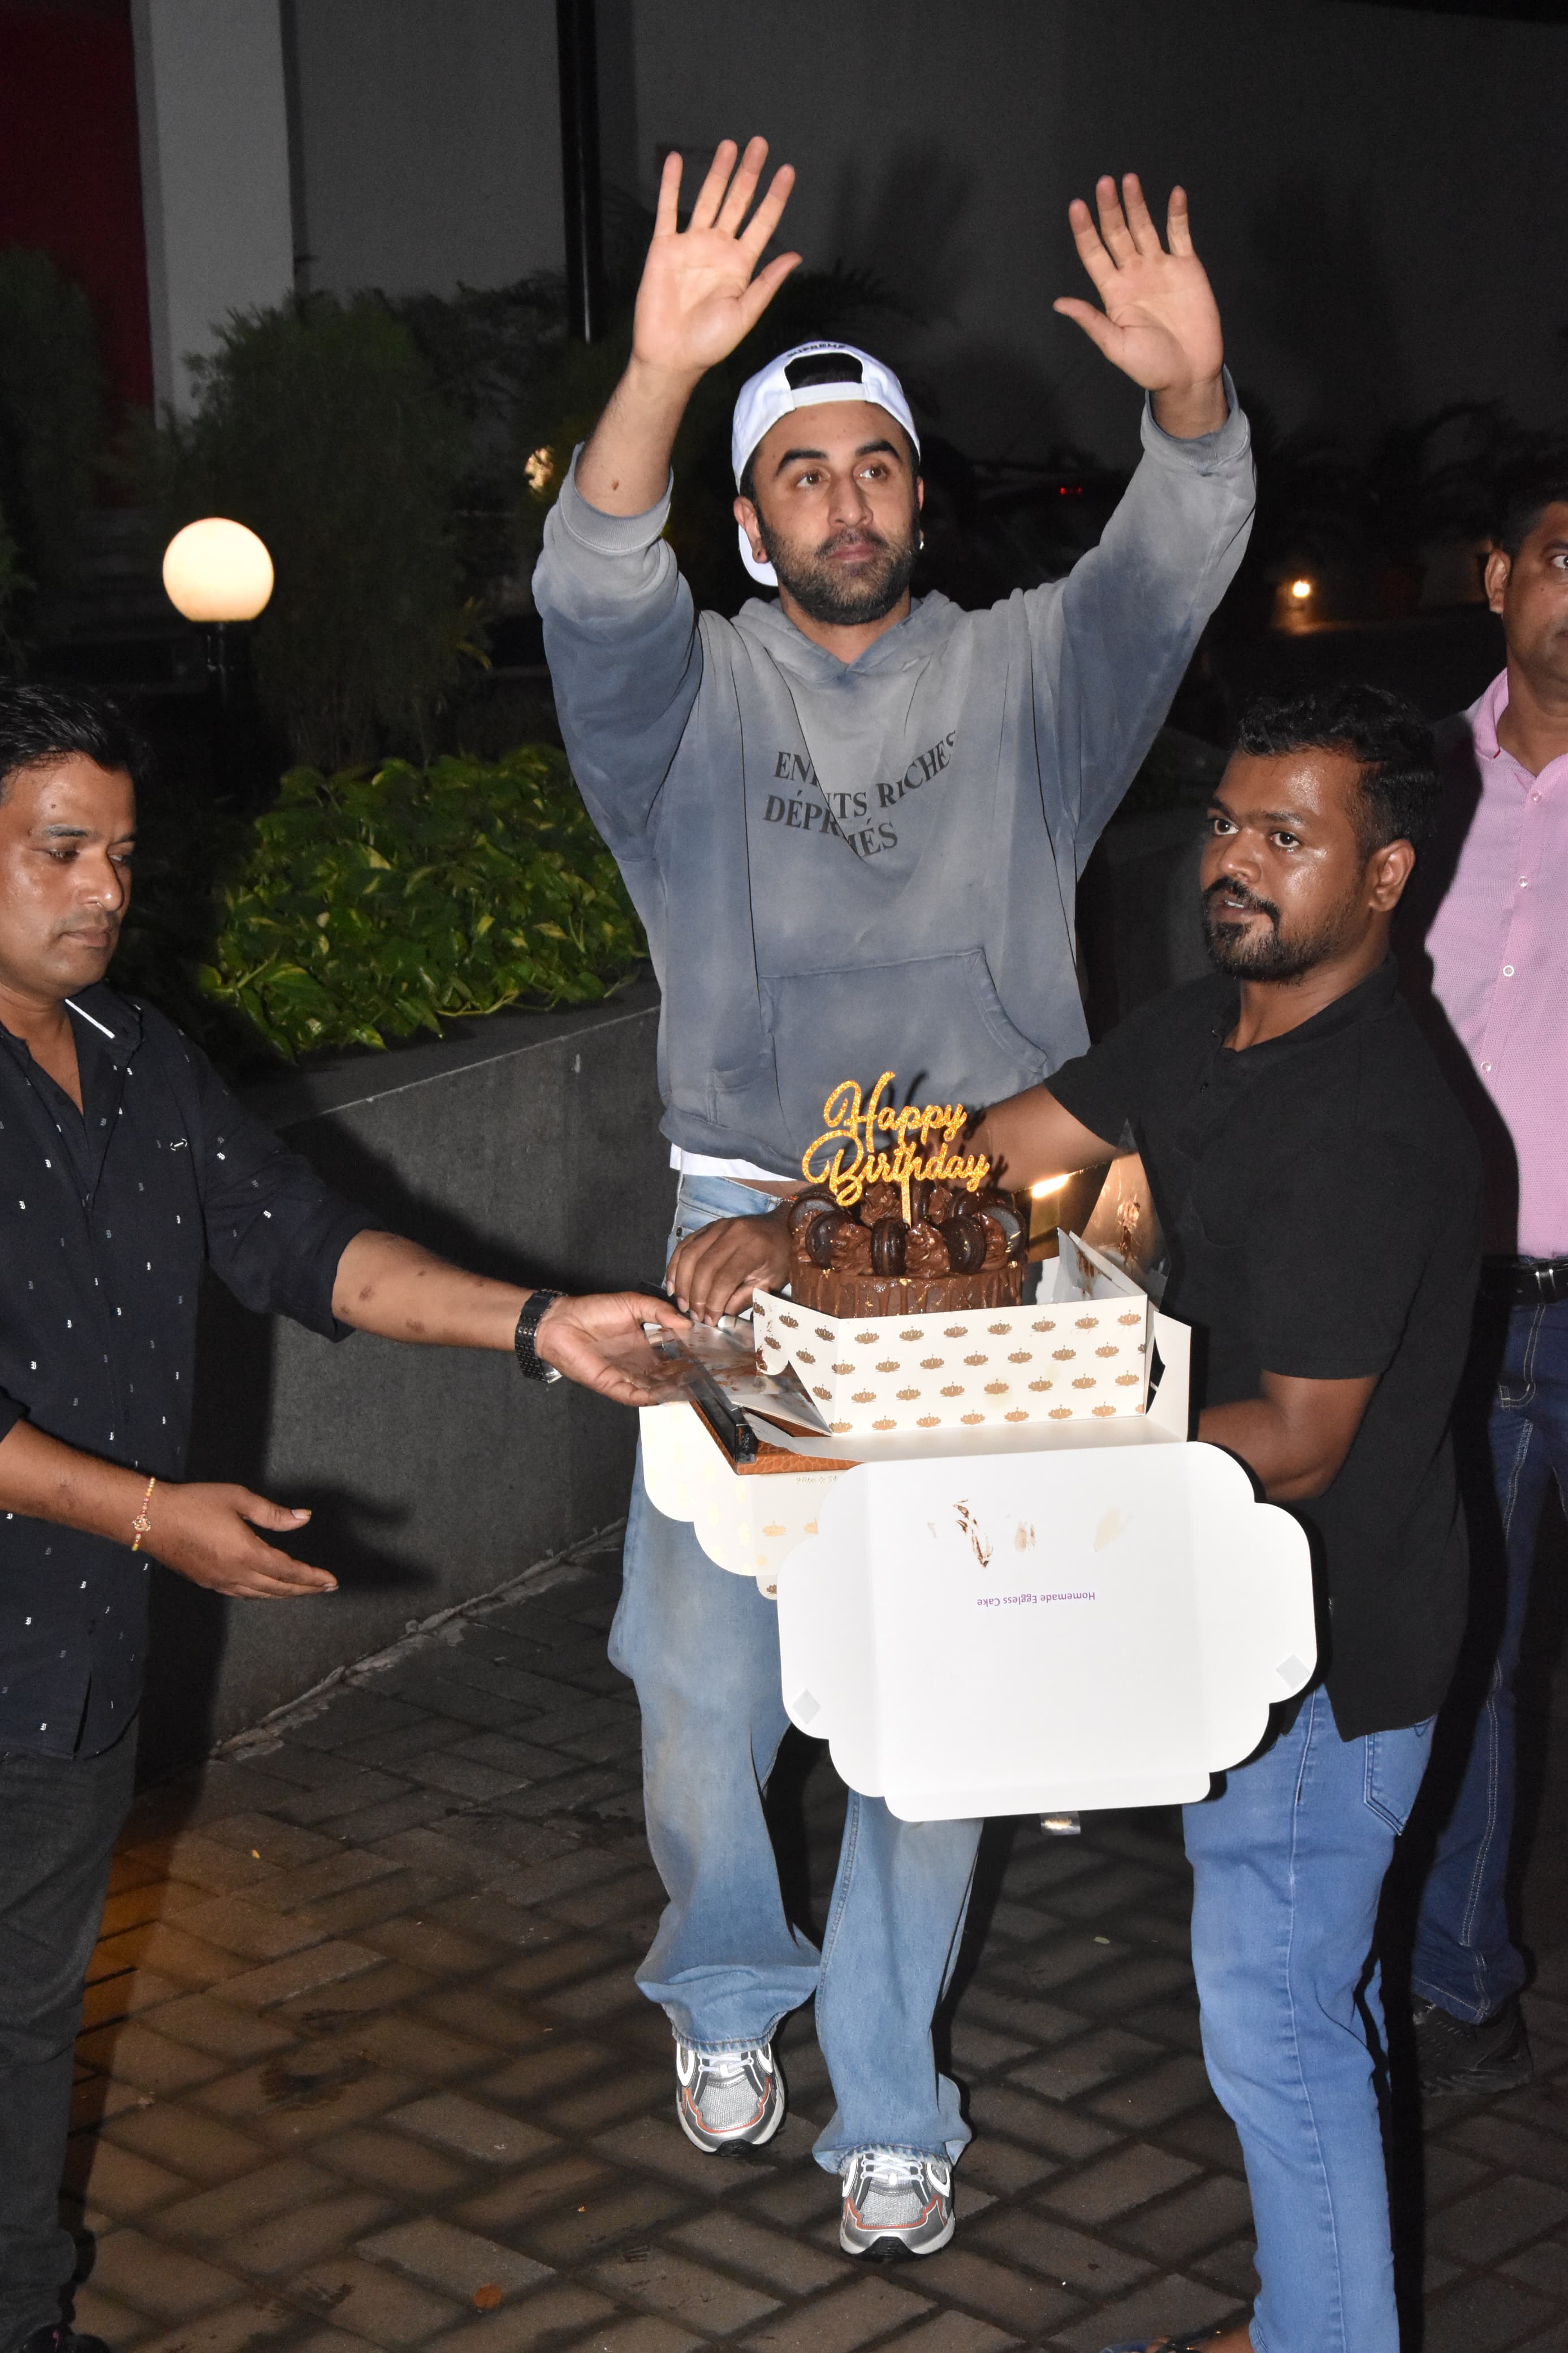 To their sheer delight, Ranbir emerged from his abode, holding a birthday cake, and joined his adoring fans in the celebration. 